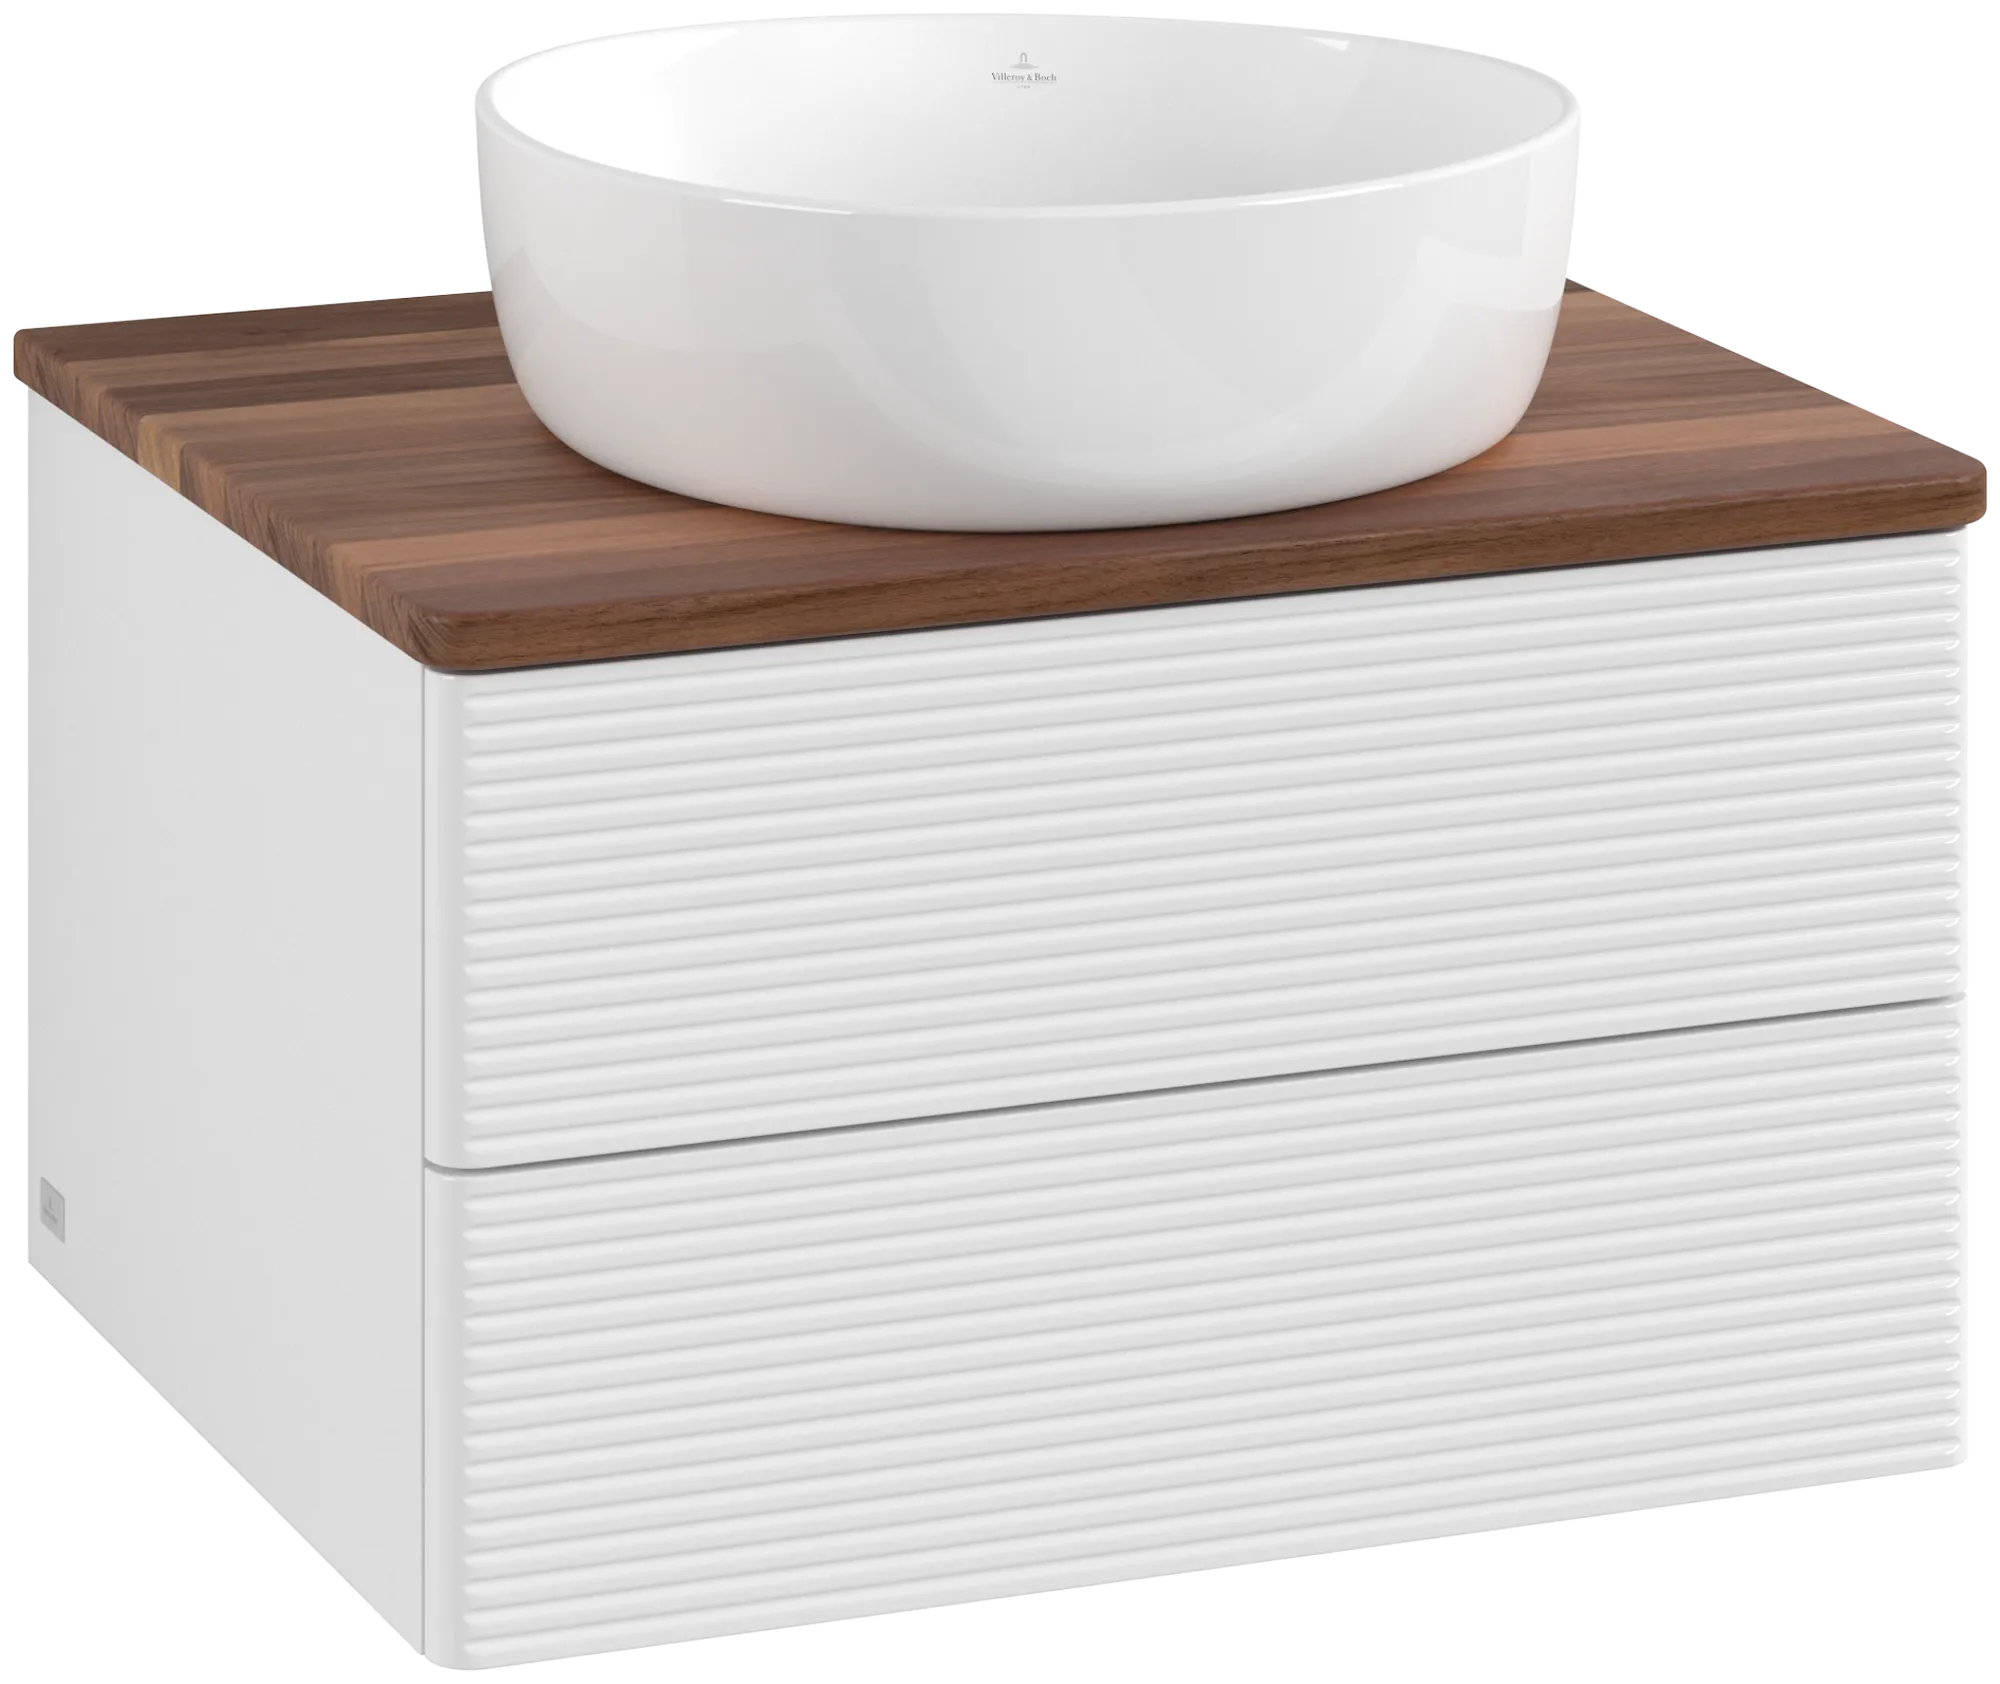 Picture of VILLEROY BOCH Antao Vanity unit, with lighting, 2 pull-out compartments, 600 x 360 x 500 mm, Front with grain texture, Glossy White Lacquer / Warm Walnut #L18112GF